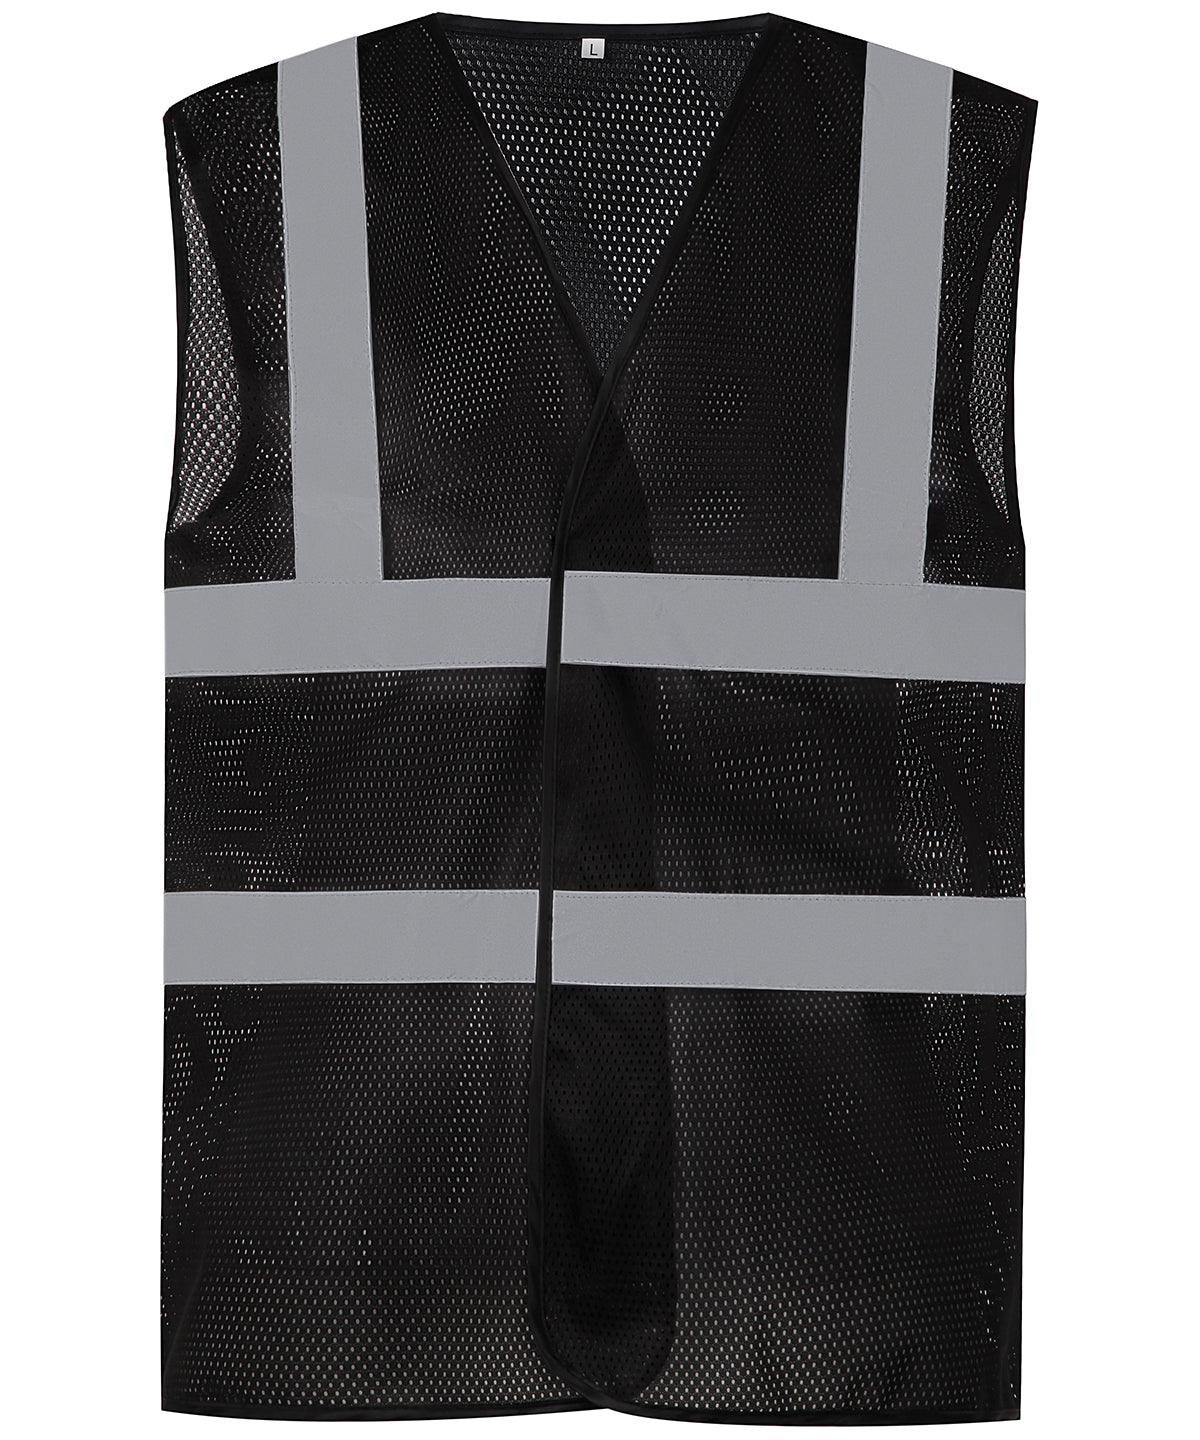 Black - Top cool open mesh 2-band-and-braces waistcoat (HVW120) Safety Vests Yoko Plus Sizes, Safety Essentials, Safetywear, Workwear Schoolwear Centres